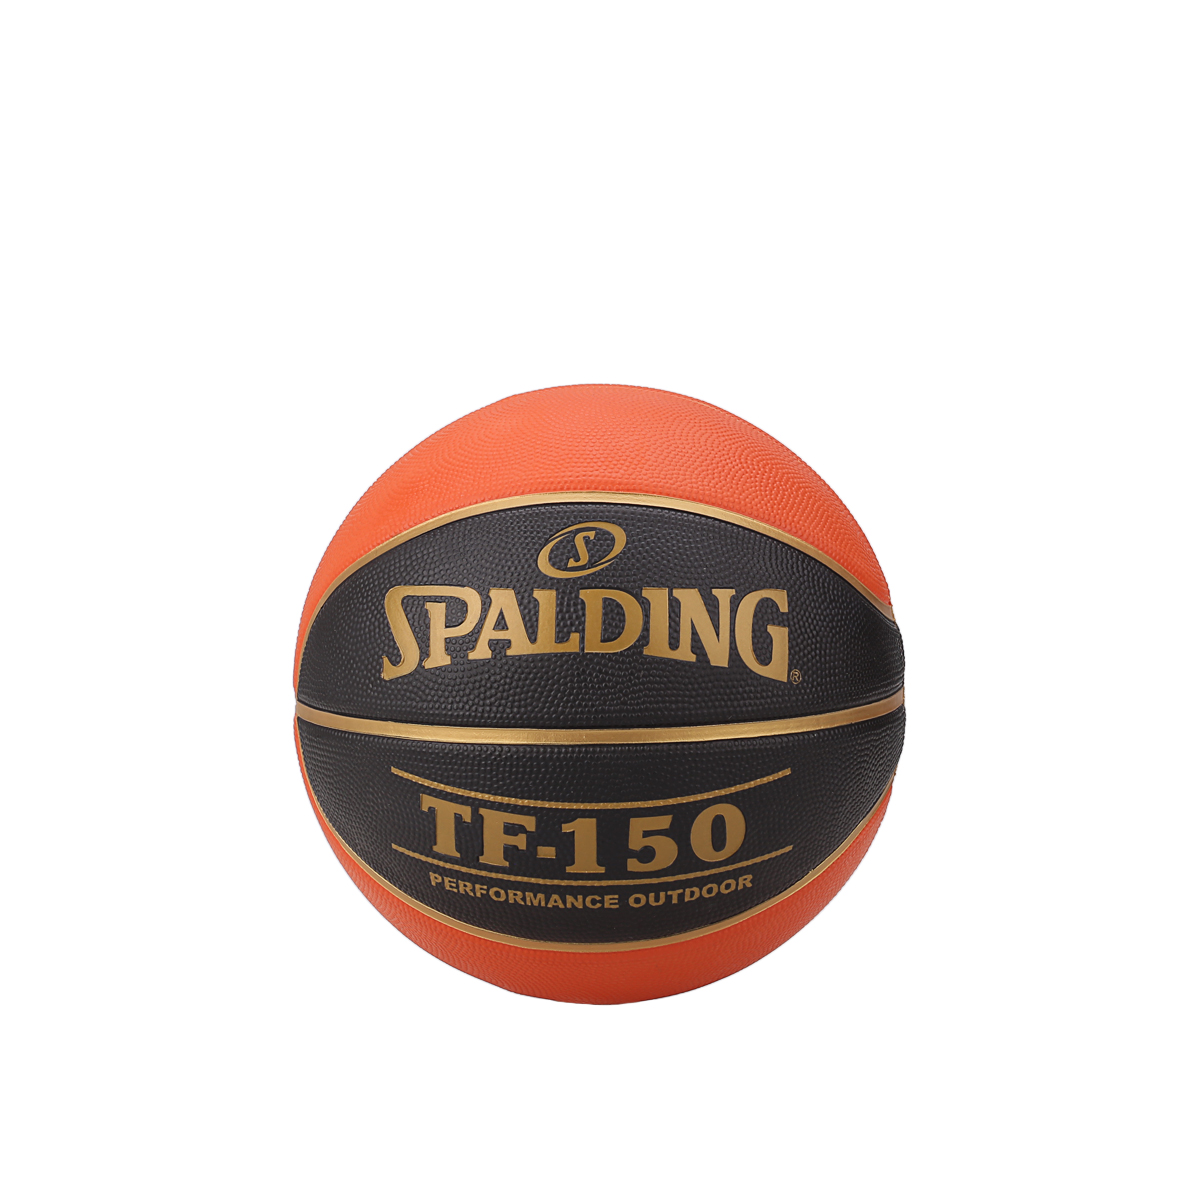 Pelota Spalding TF -150 Performance Outdoor N°6,  image number null